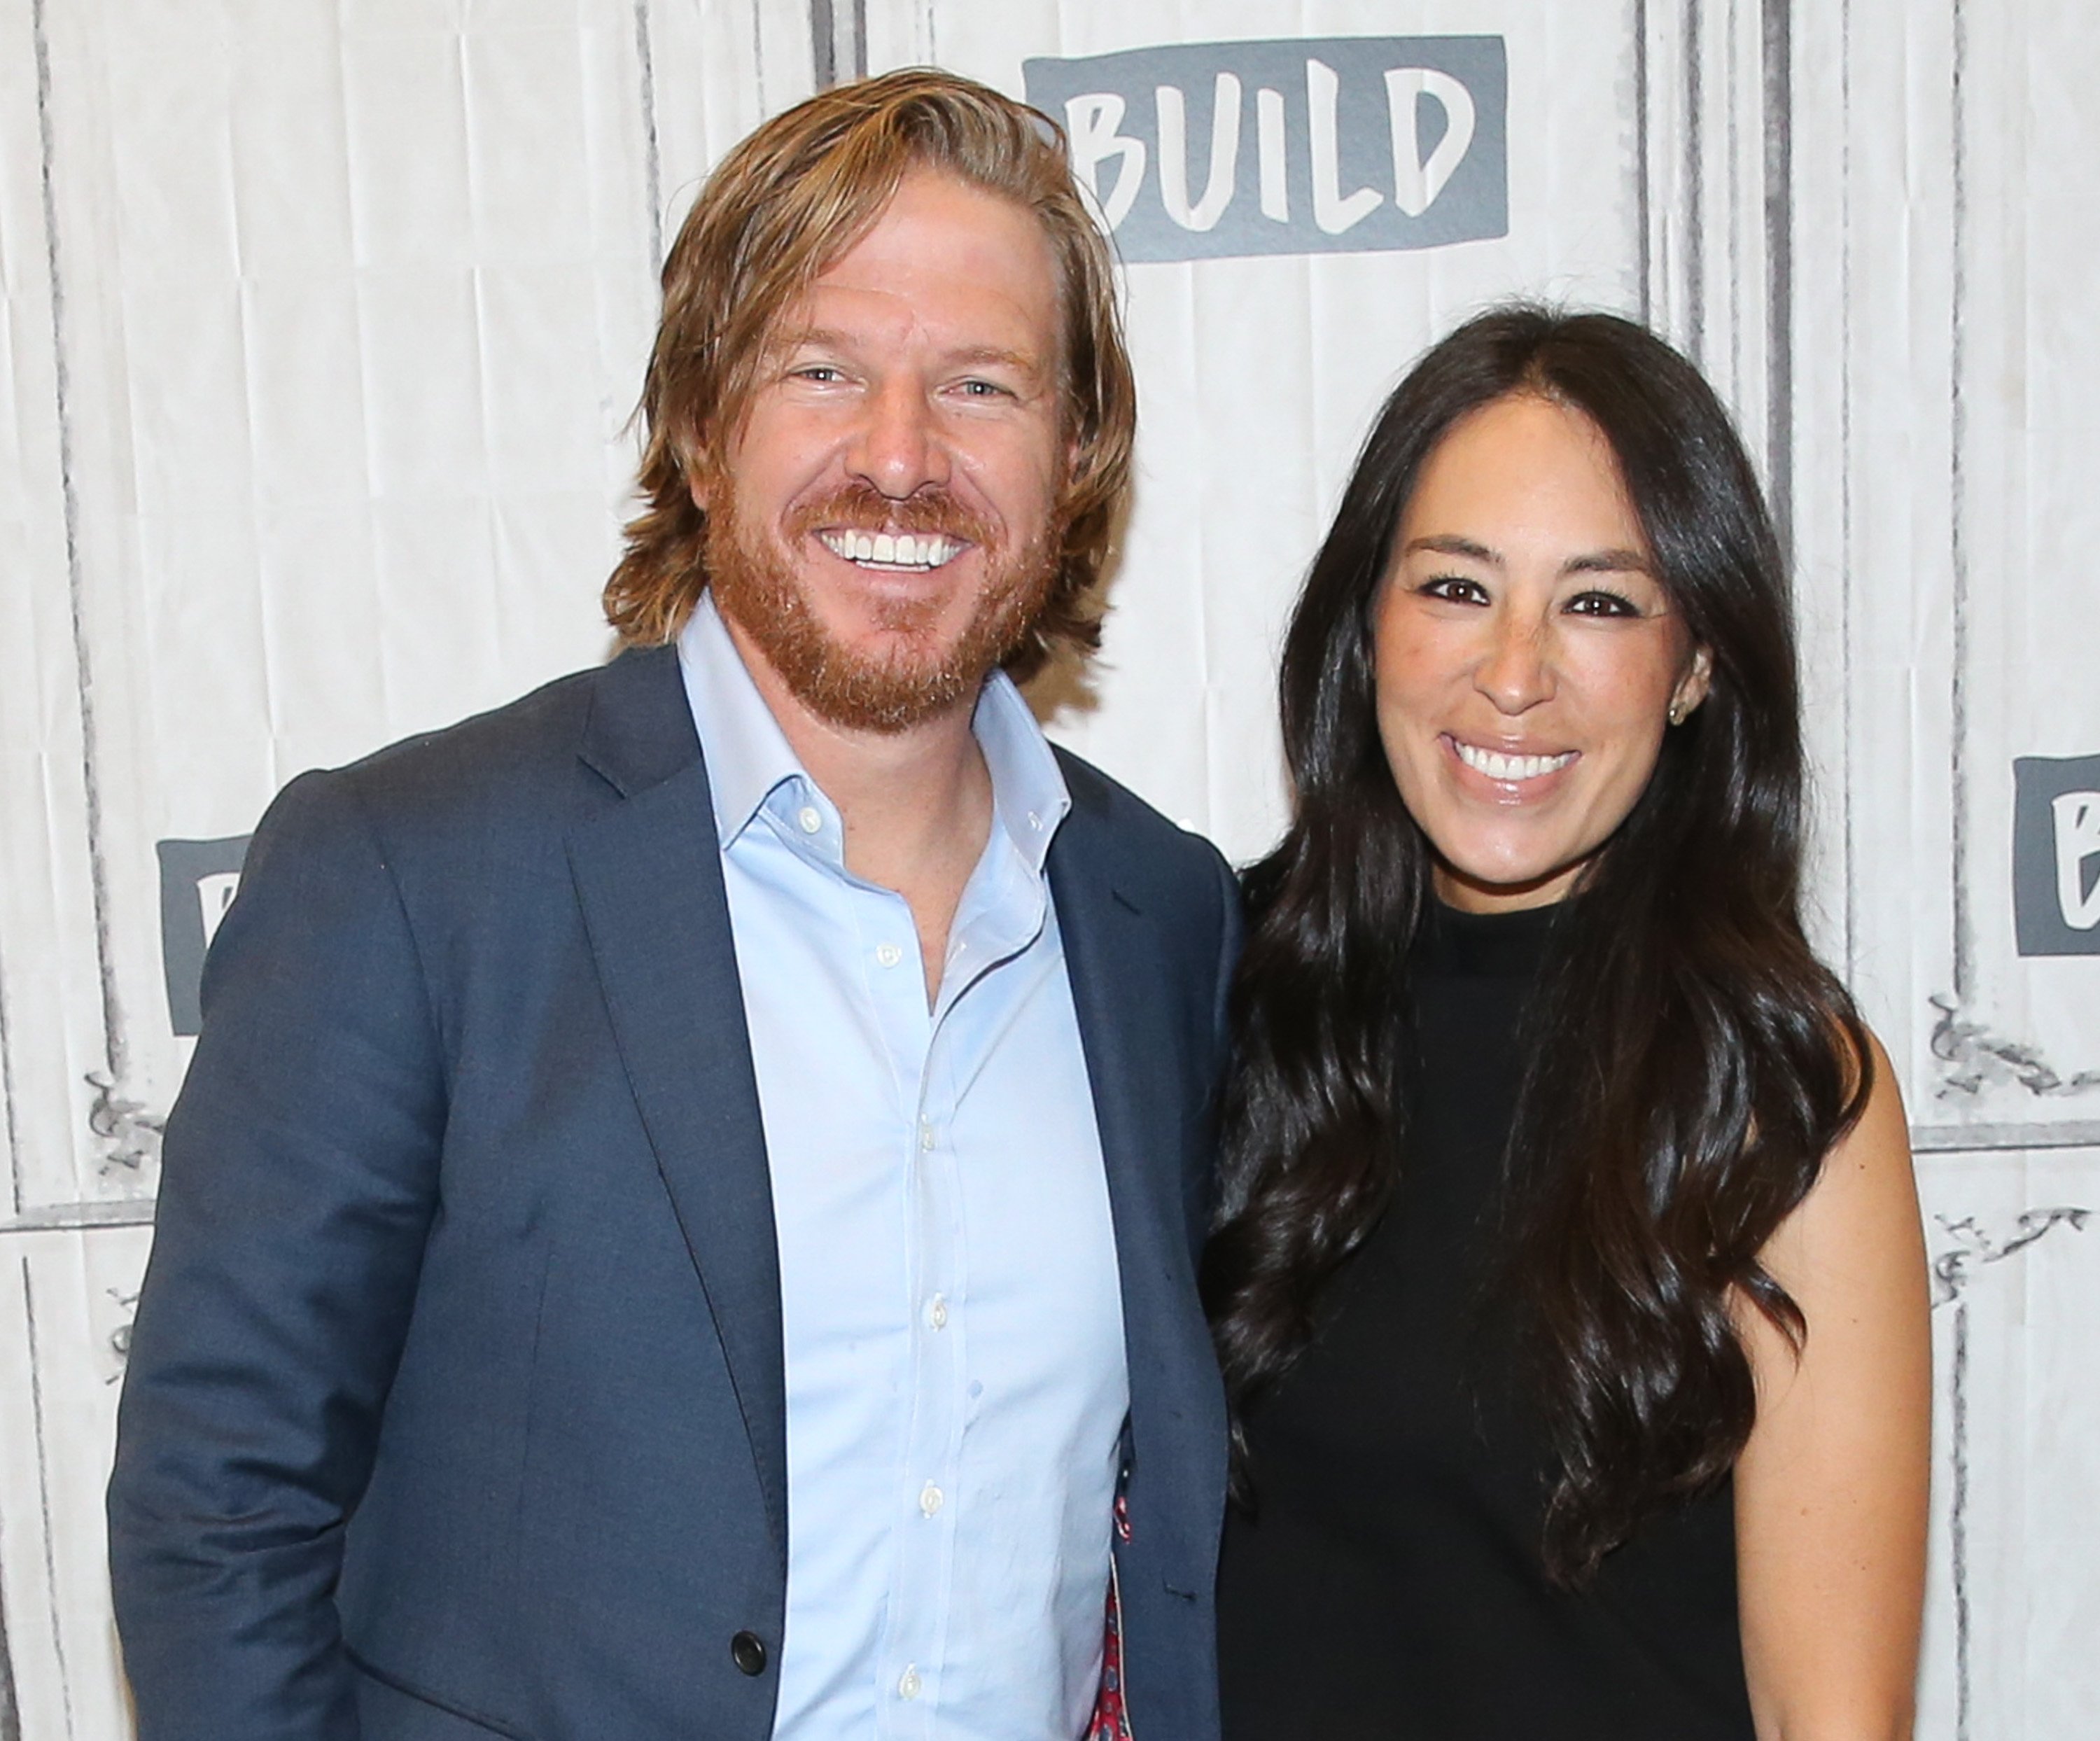 Chip Gaines and Joanna Gaines attend the Build Series at Build Studio on October 18, 2017. | Photo: GettyImages